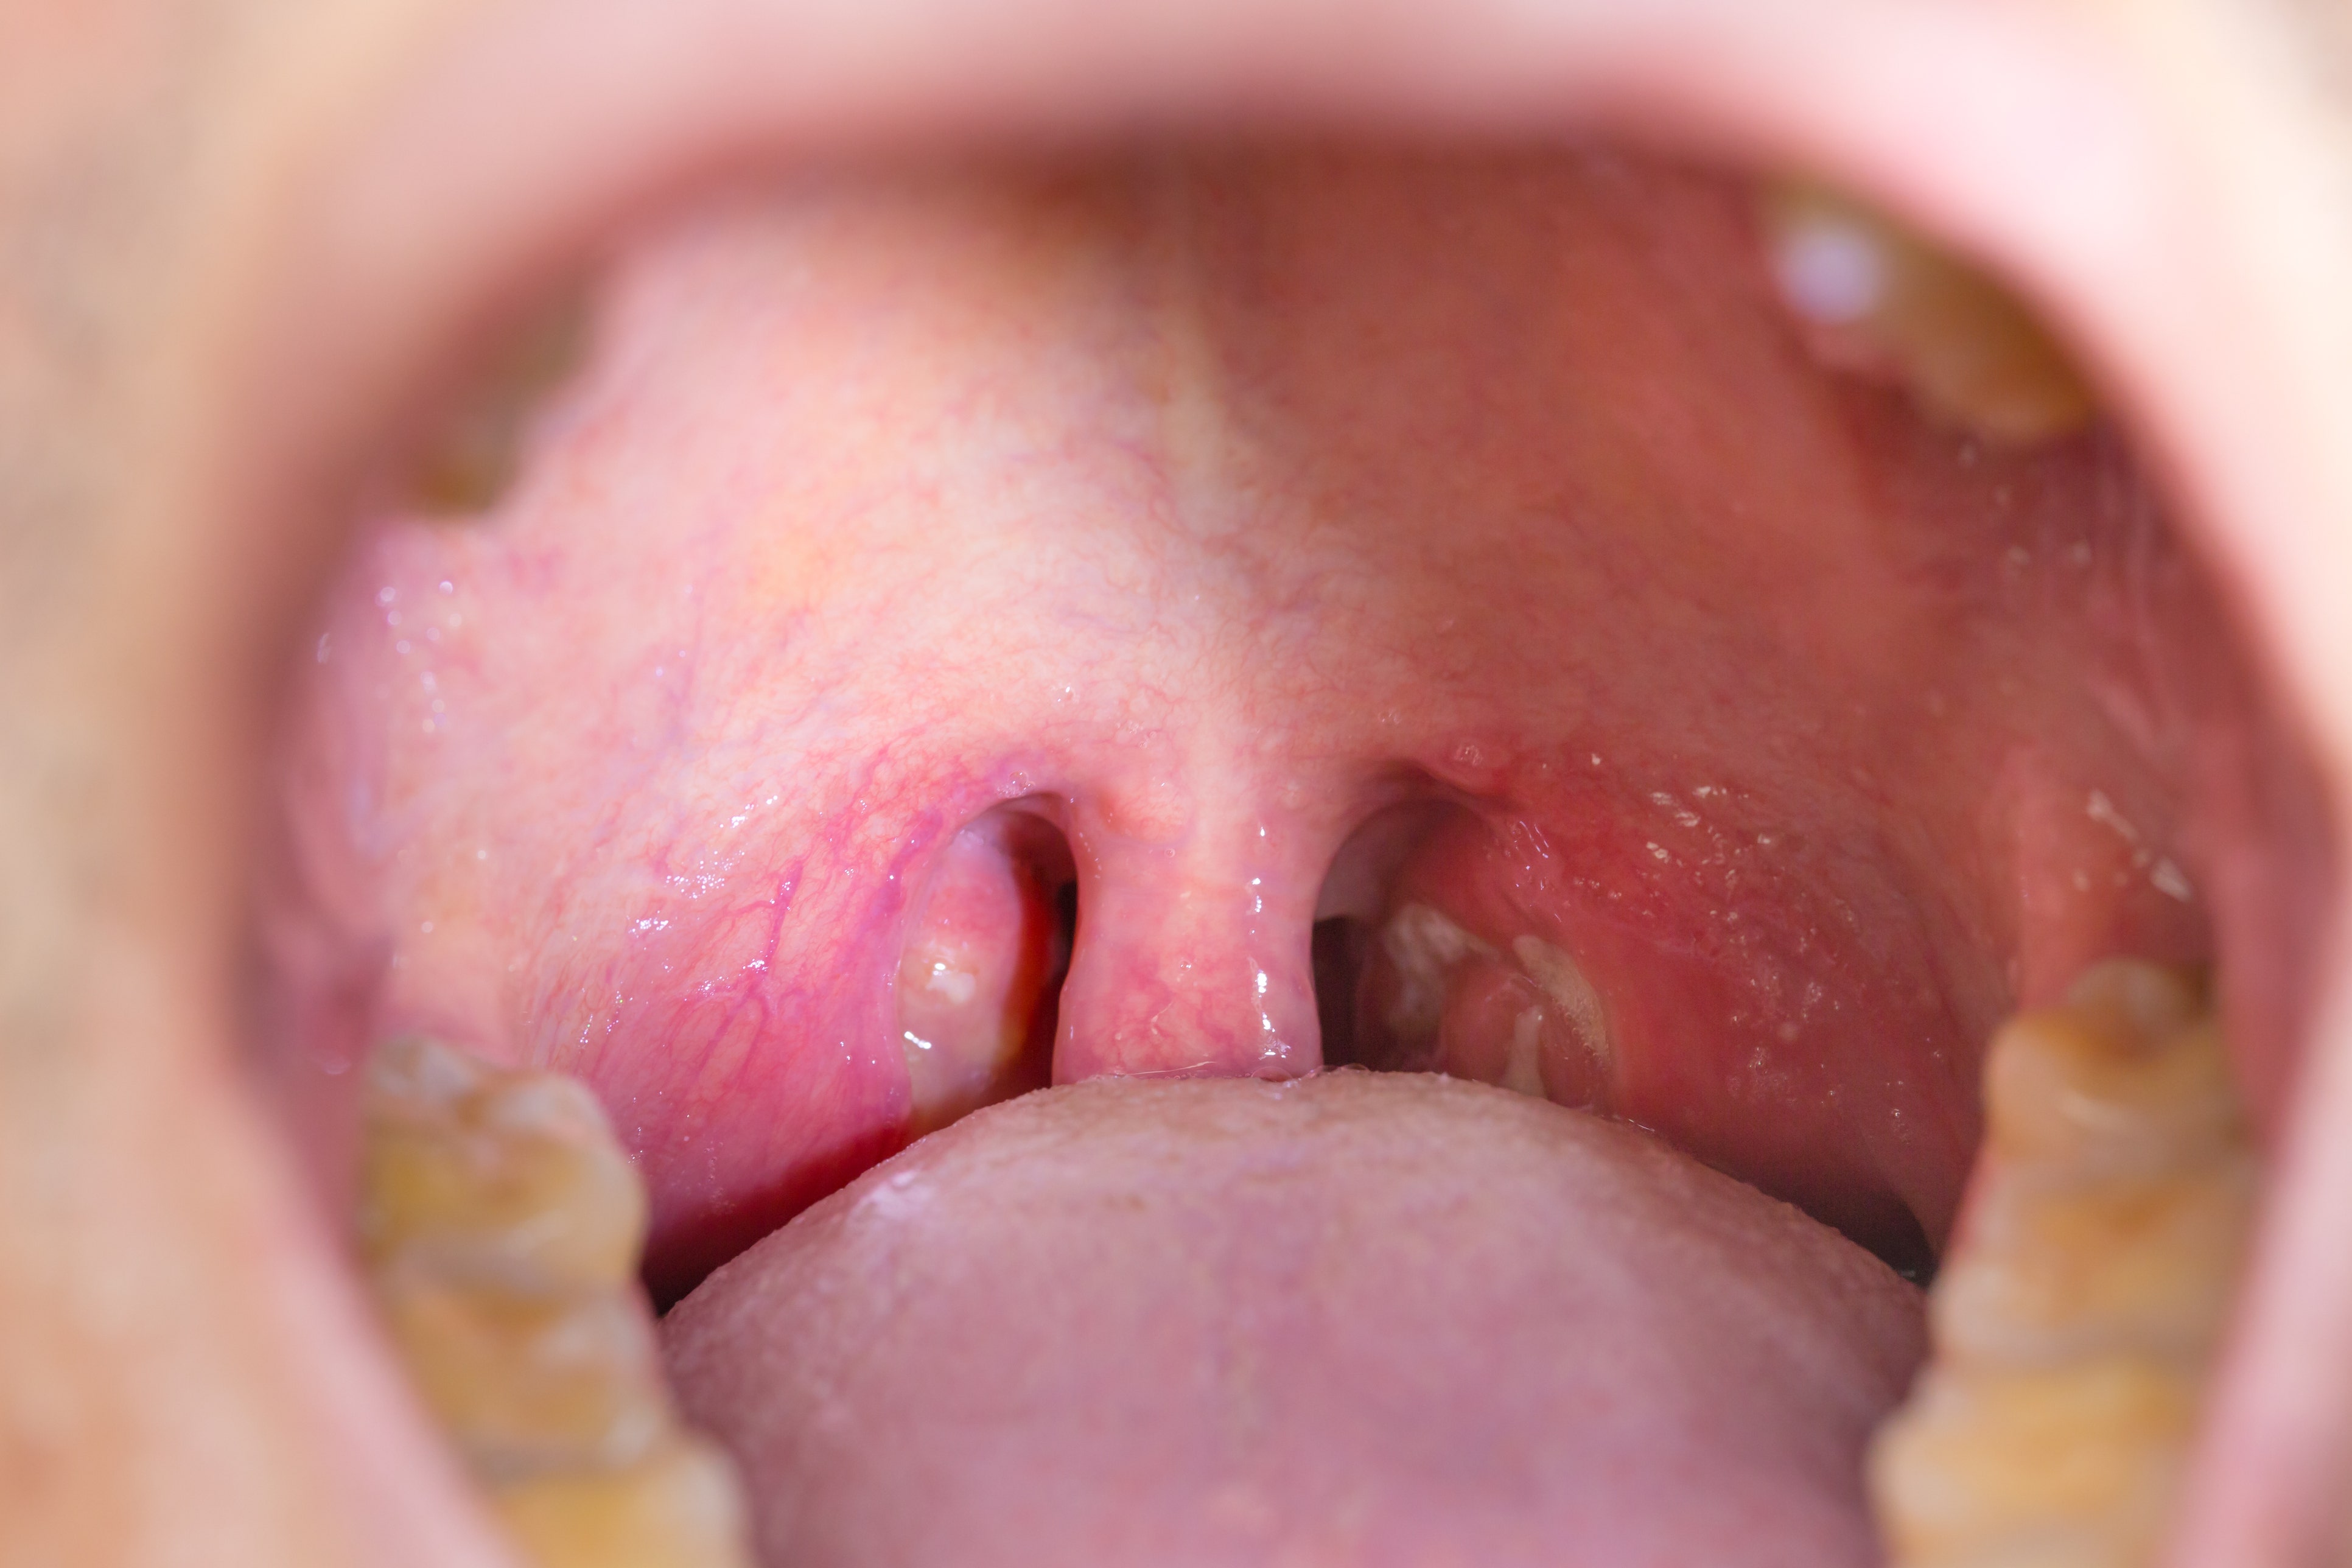 tonsils removed pictures